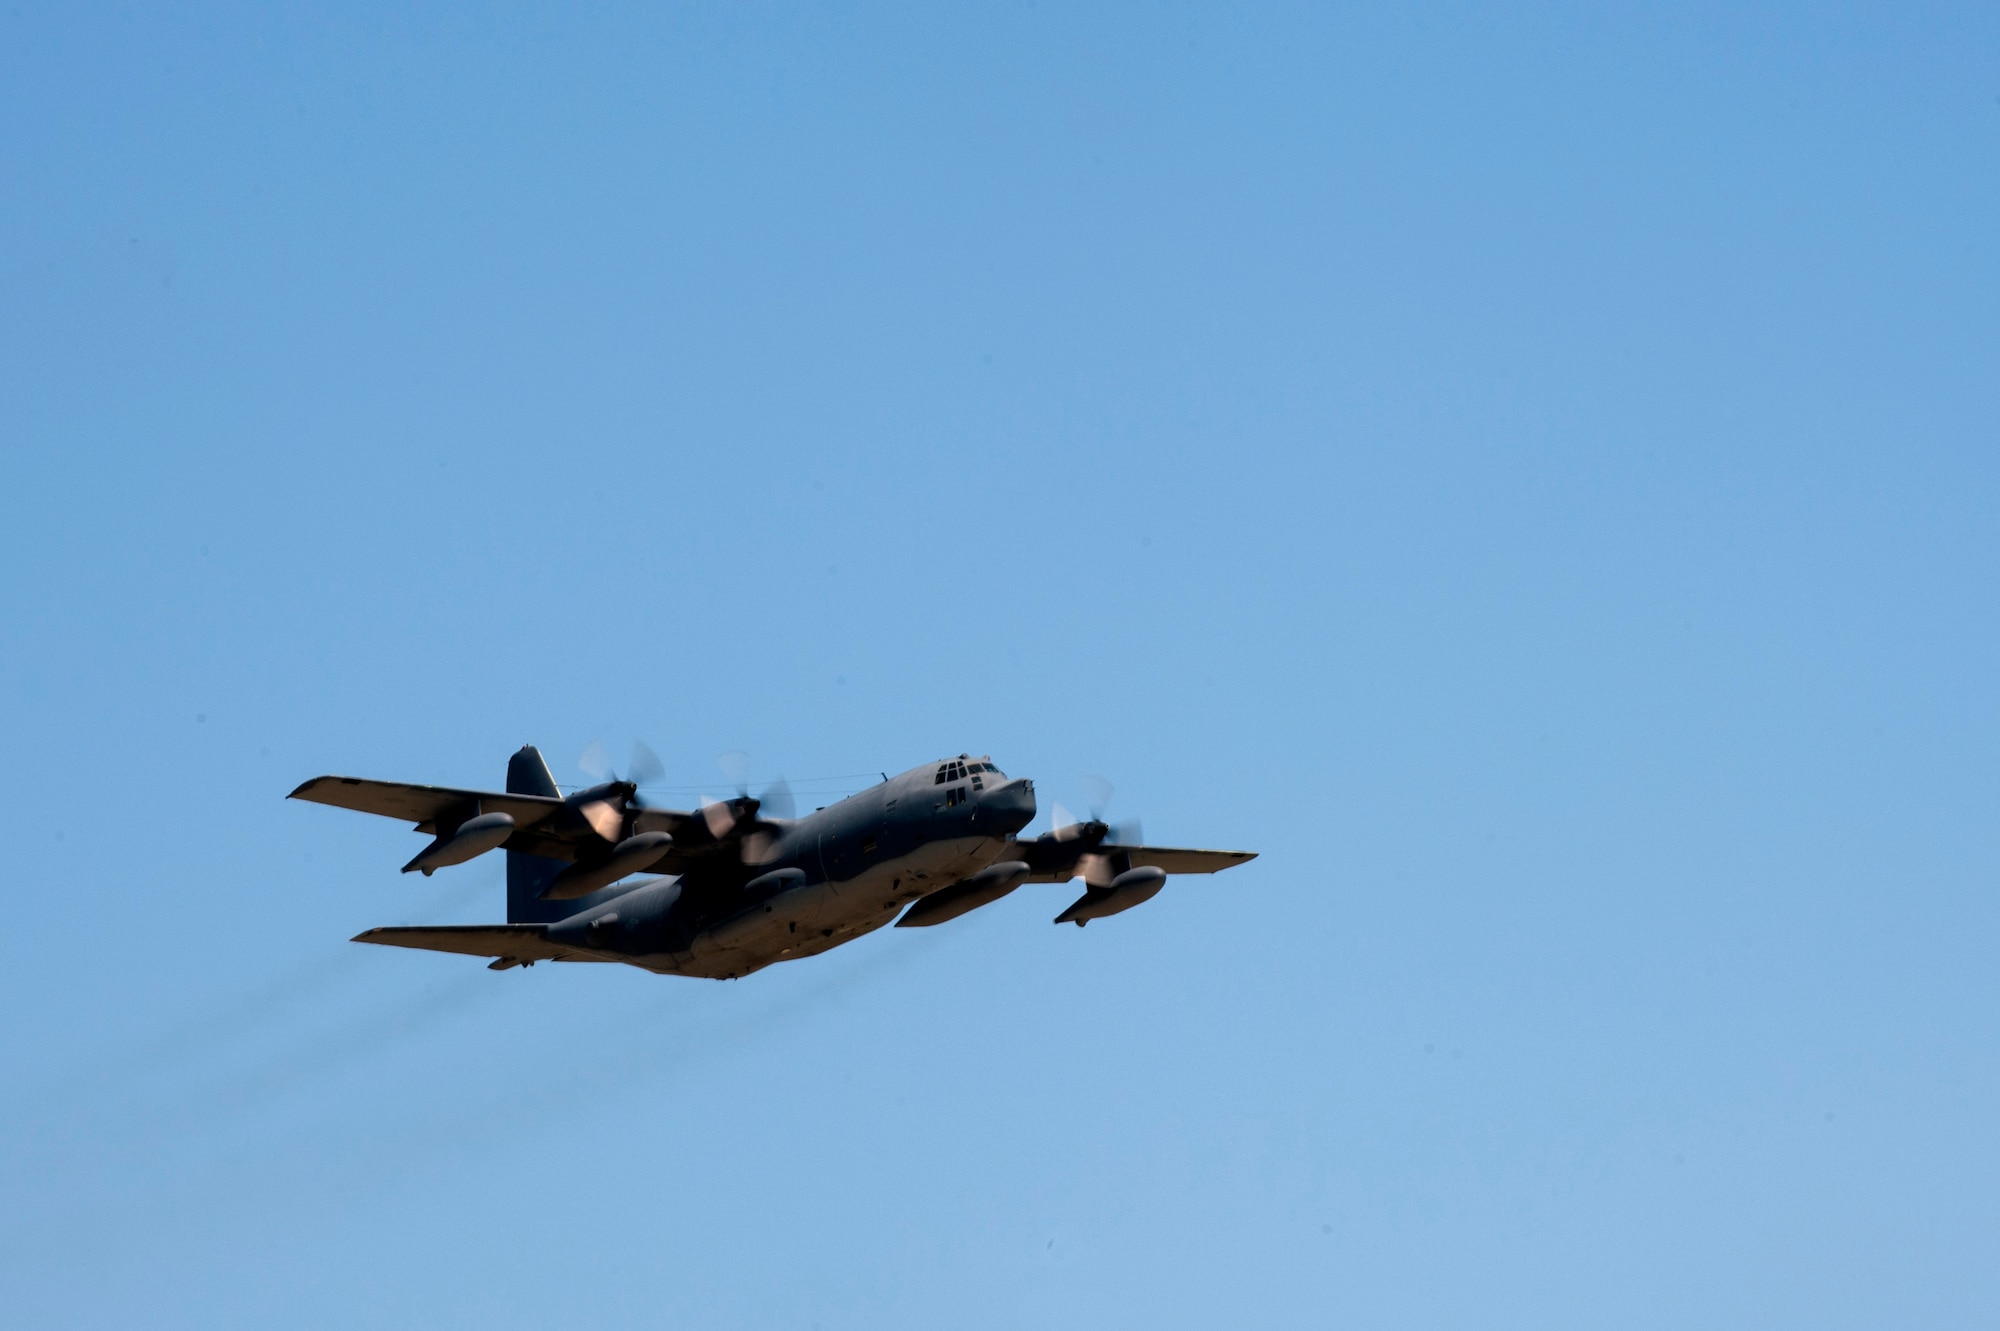 One of the last two MC-130P Combat Shadows in the Pacific takes off from Kadena Air Base, Japan, and begins its journey to retirement at the “boneyard” at Davis-Monthan Air Force Base, Ariz., April 15, 2015. From providing helicopter air-to-air refueling to conducting long-range support of Special Operations Forces, the Combat Shadow has provided a critical service to the U.S. military for nearly 50 years. (U.S. Air Force photo/Airman 1st Class Stephen G. Eigel)